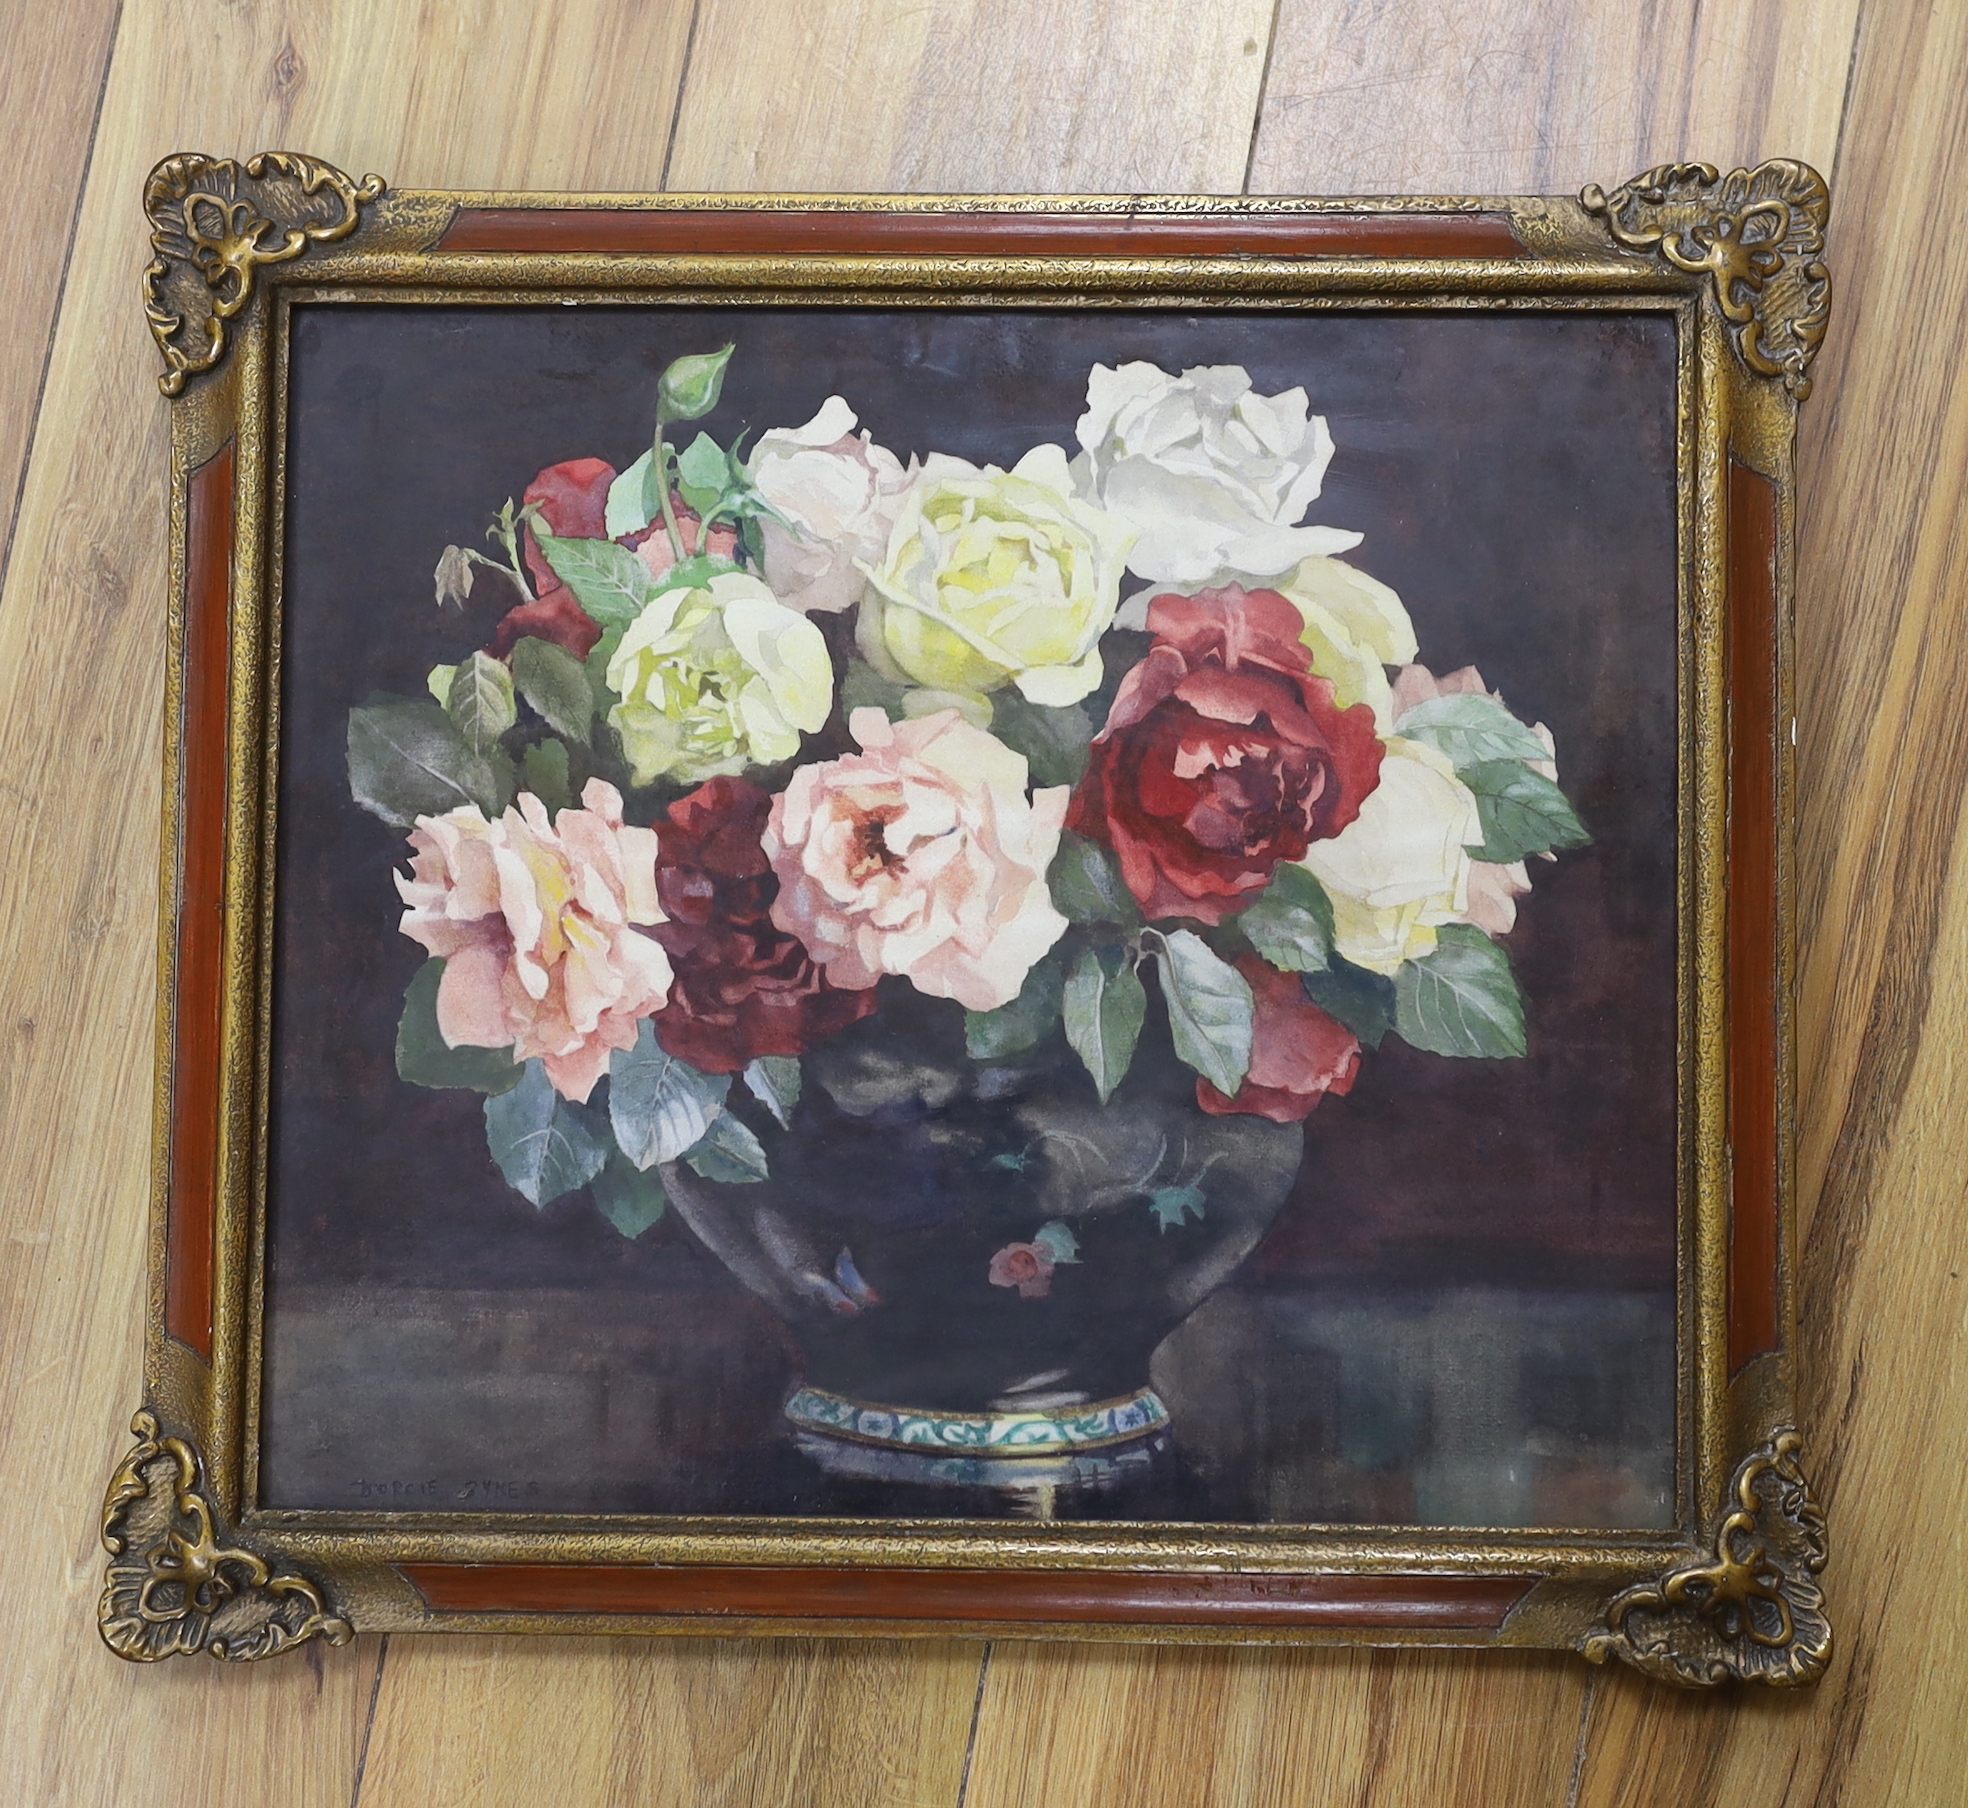 Dorcie Sykes (1908-1998), watercolour, Still life of flowers in a bowl, signed, Harrods Ltd. label verso, 32 x 37cm